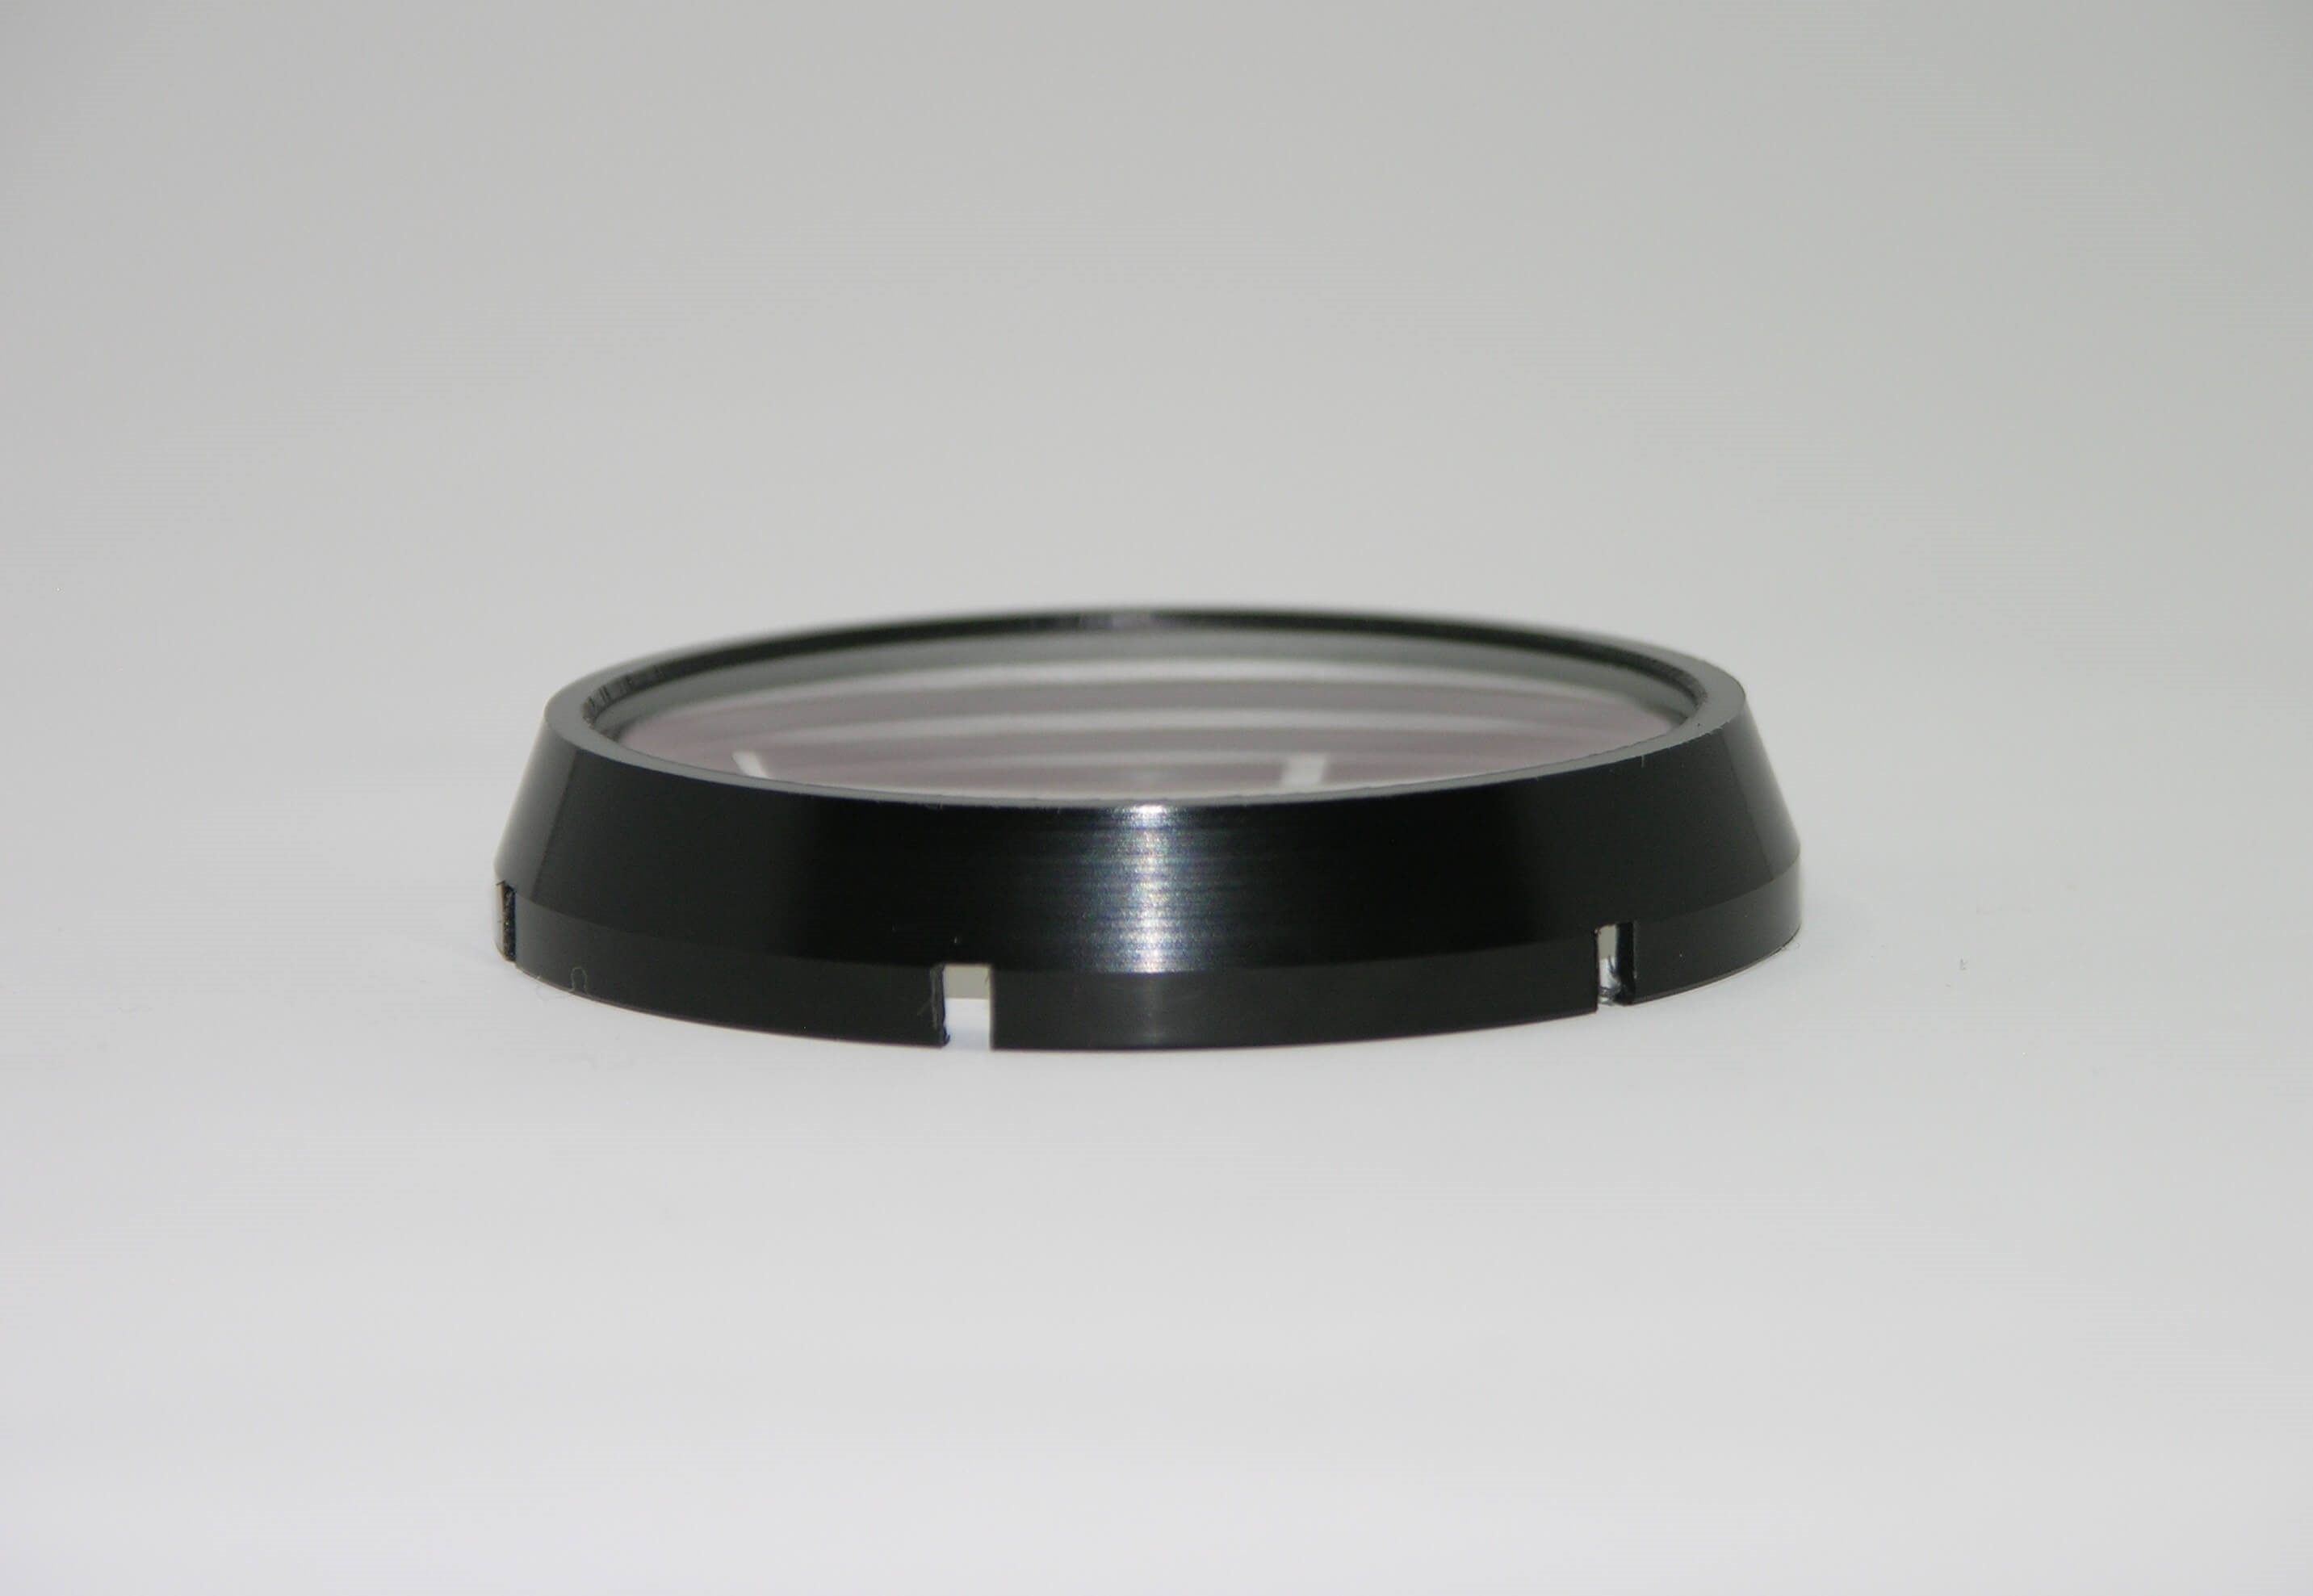 Mantis Compat 3X Adapter - to be used with 4x Objective